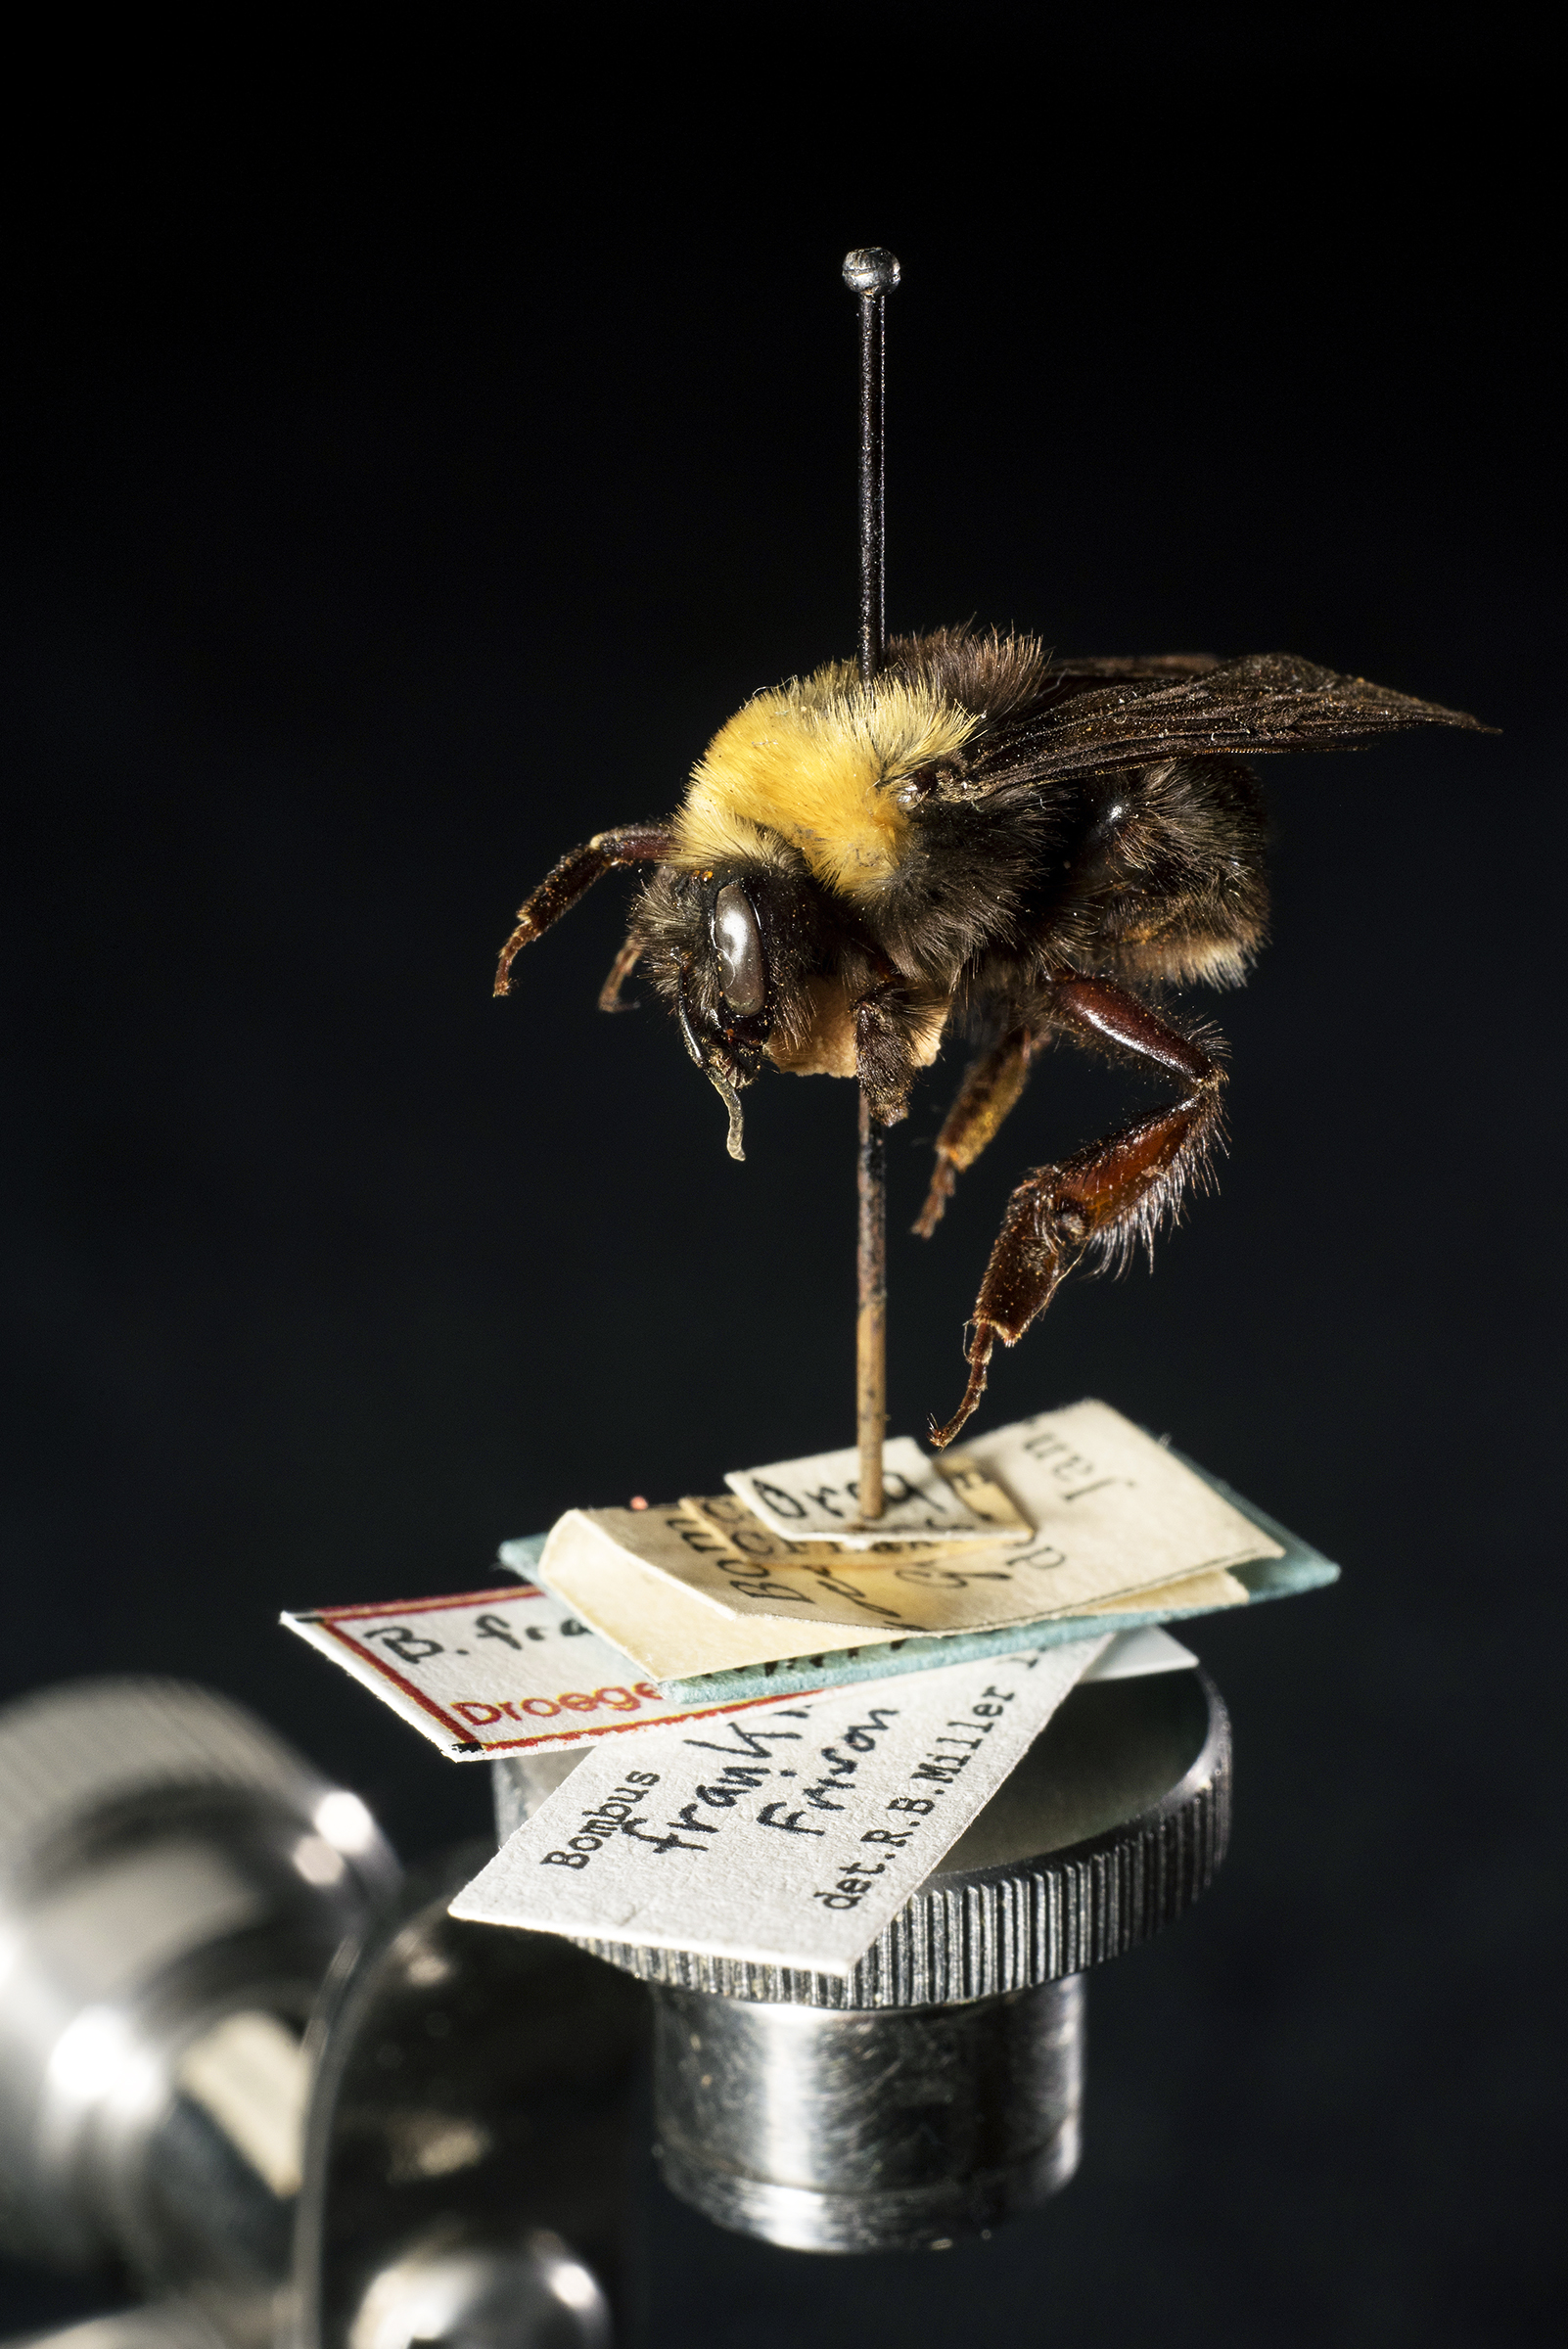 The Franklin’s bumble bee, possibly the first U.S. bumble bee to go extinct, is now only seen pinned in museums. (c) Clay Bolt